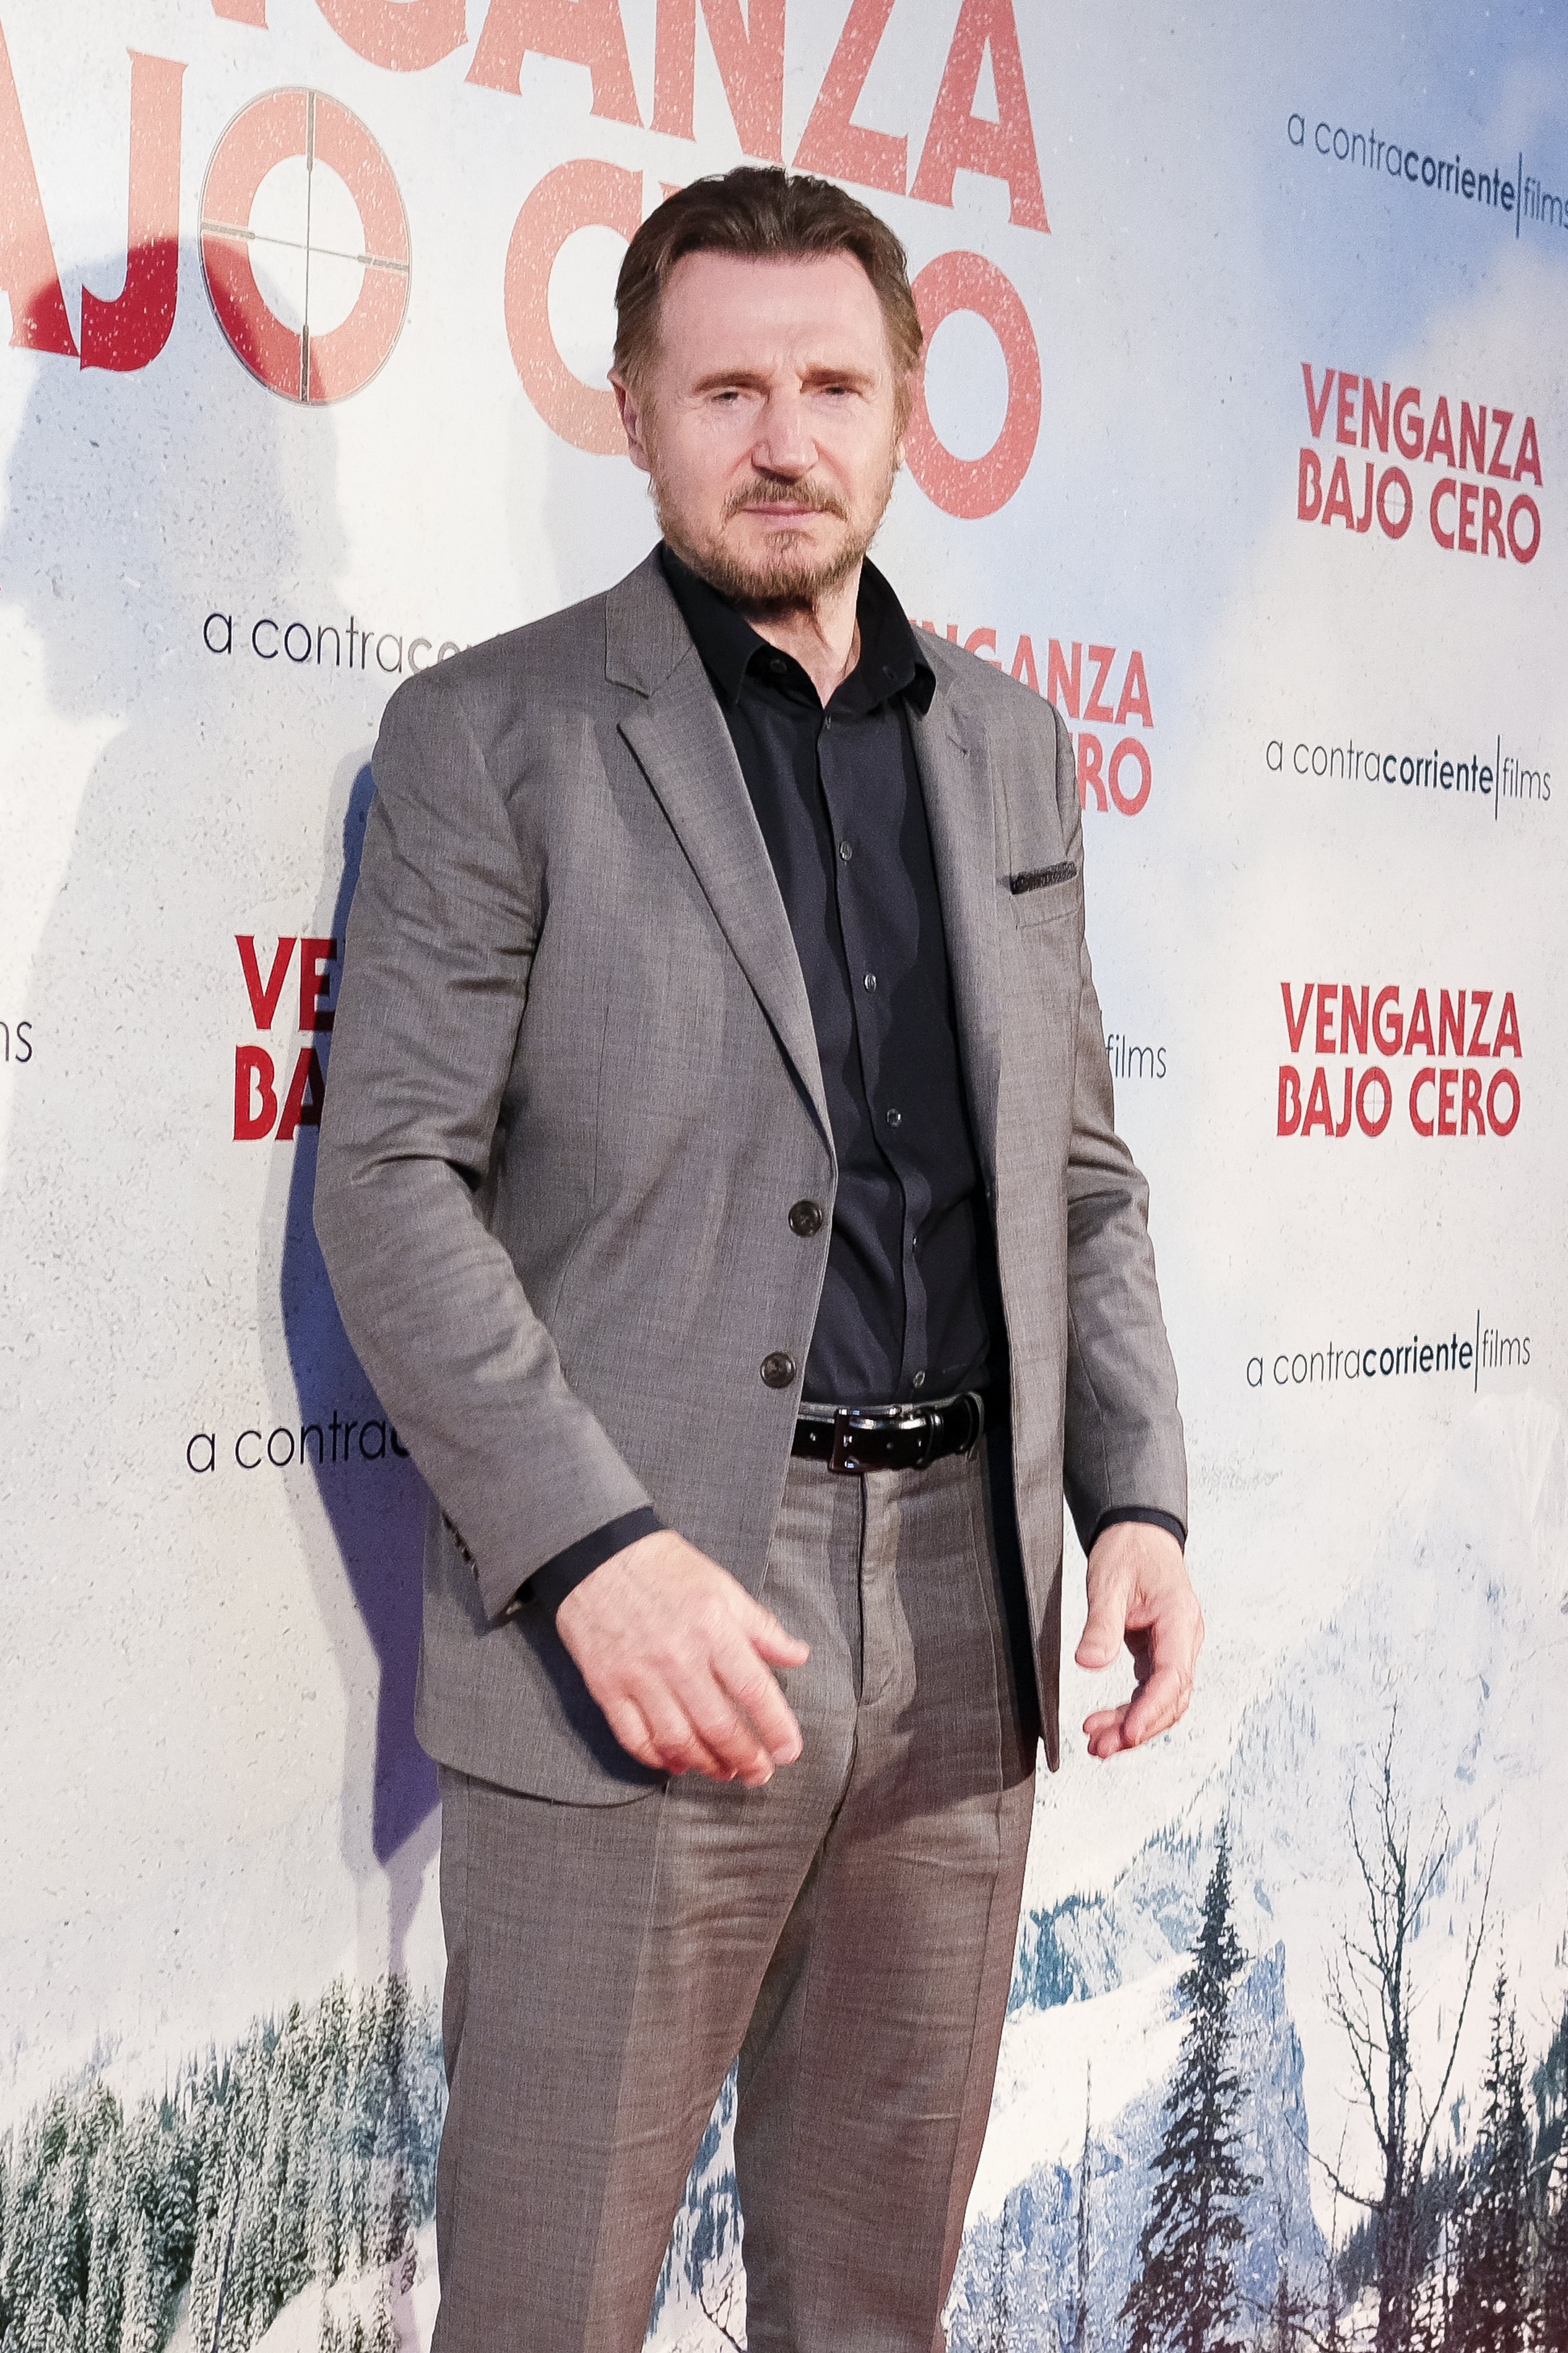 Liam Neeson attends the Venganza Bajo Cero's premiere at the Capitol cinema on July 15, 2019, in Madrid, Spain. | Source: Getty Images